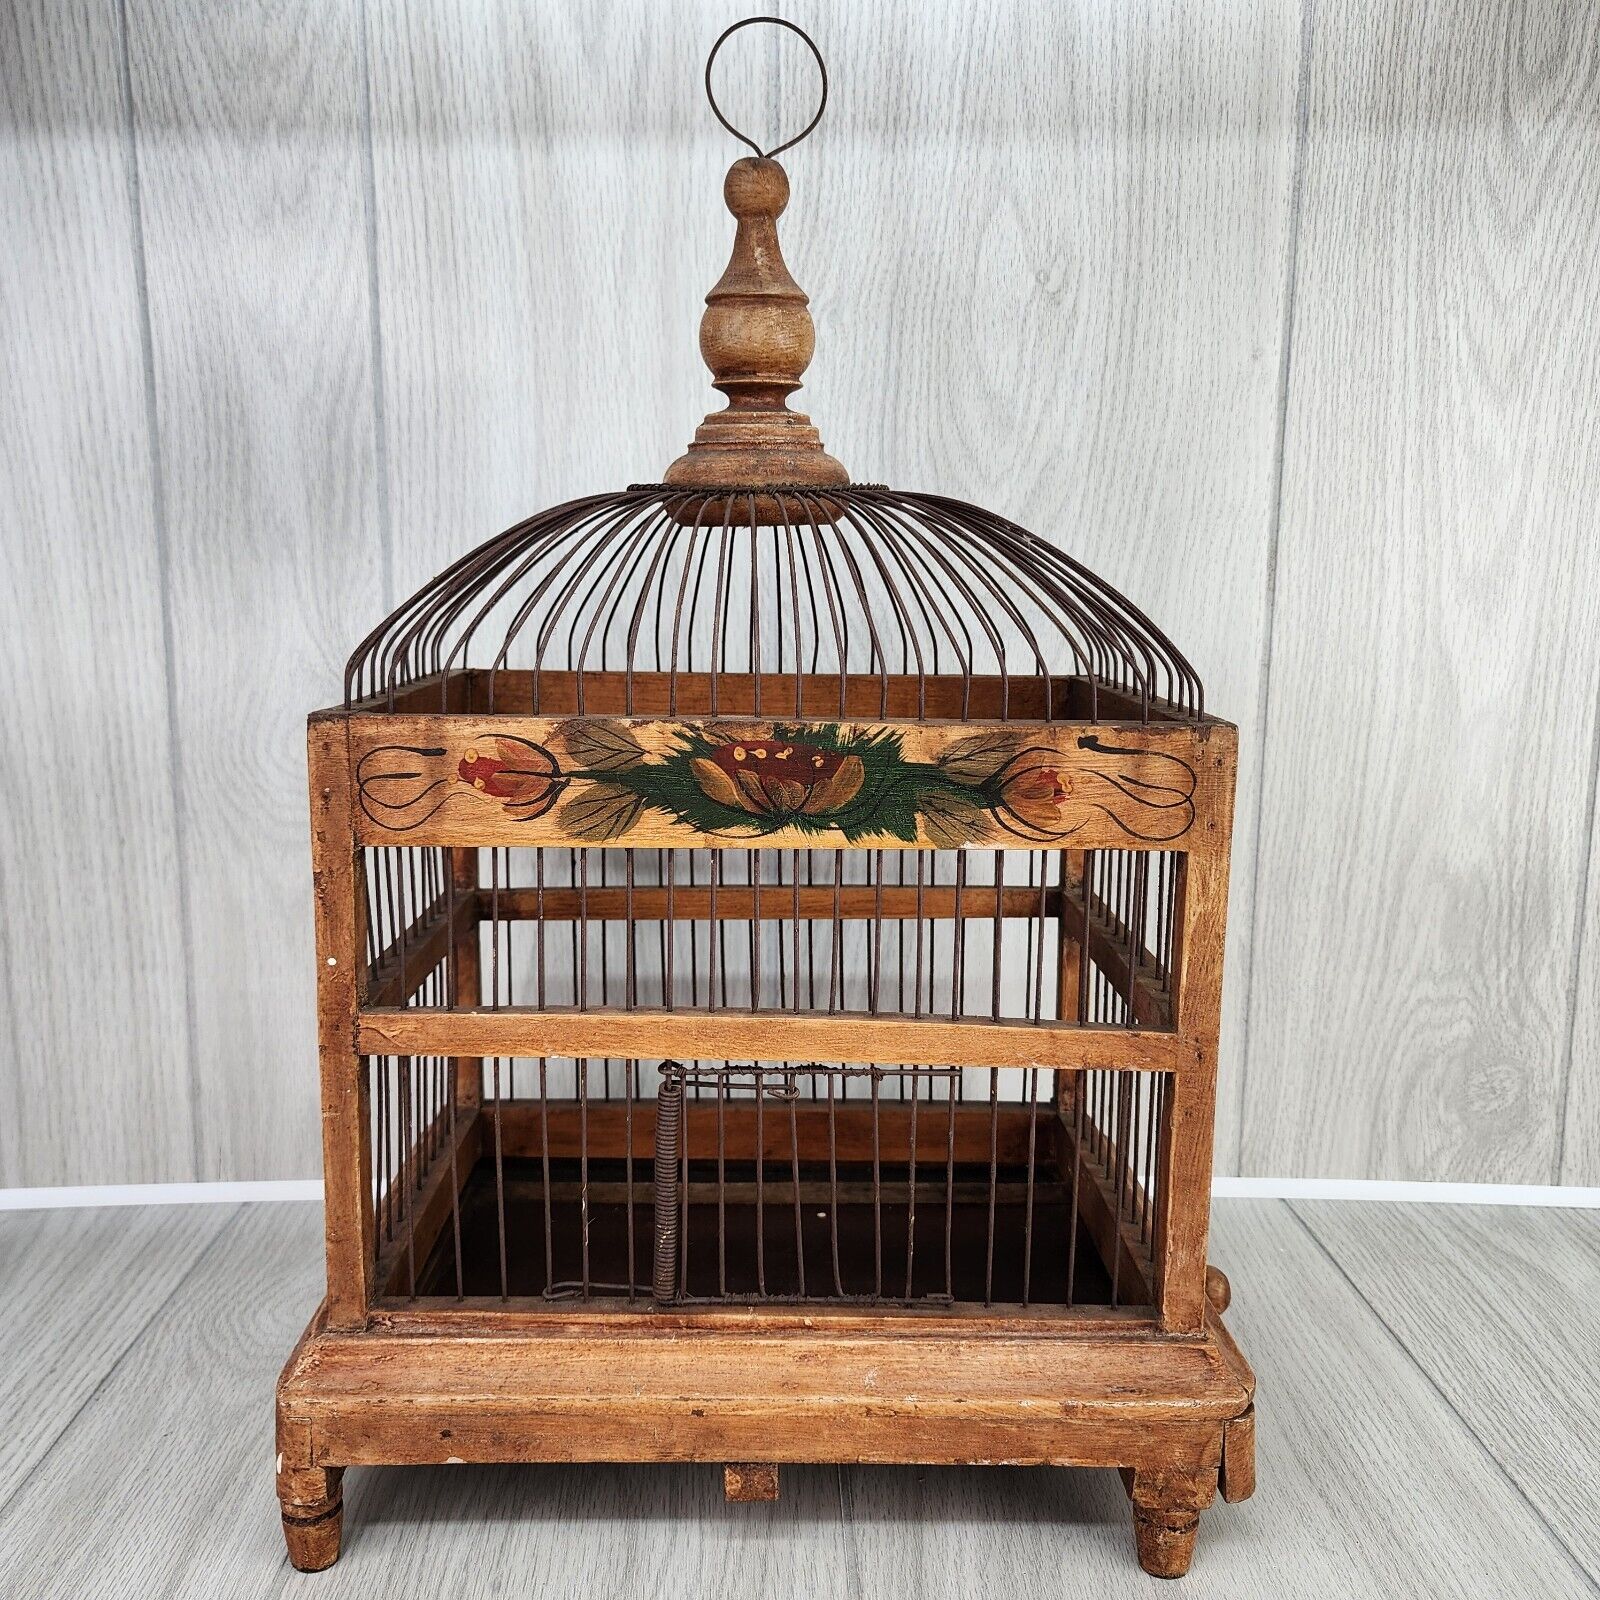 Vintage Victorian Style Birdcage 20x8x12 Wood Wire Dome Hanging Metal Slide Tray